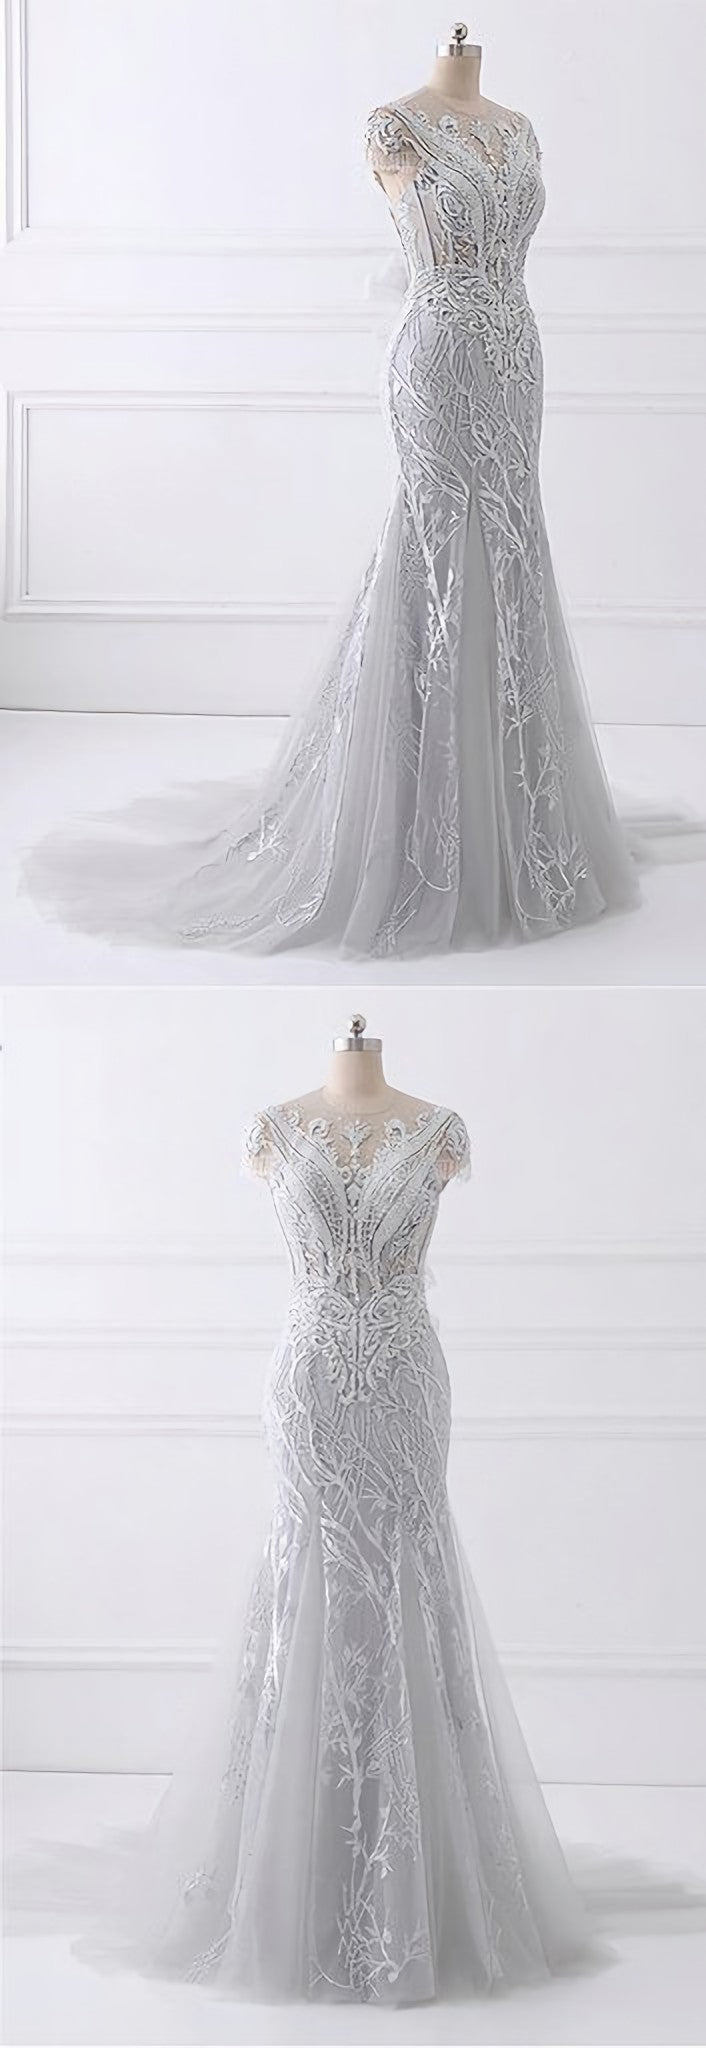 Prom Dress Long With Slit, Spring Gray Tulle Long Mermaid Prom Dress, Beaded Lace Evening Gown